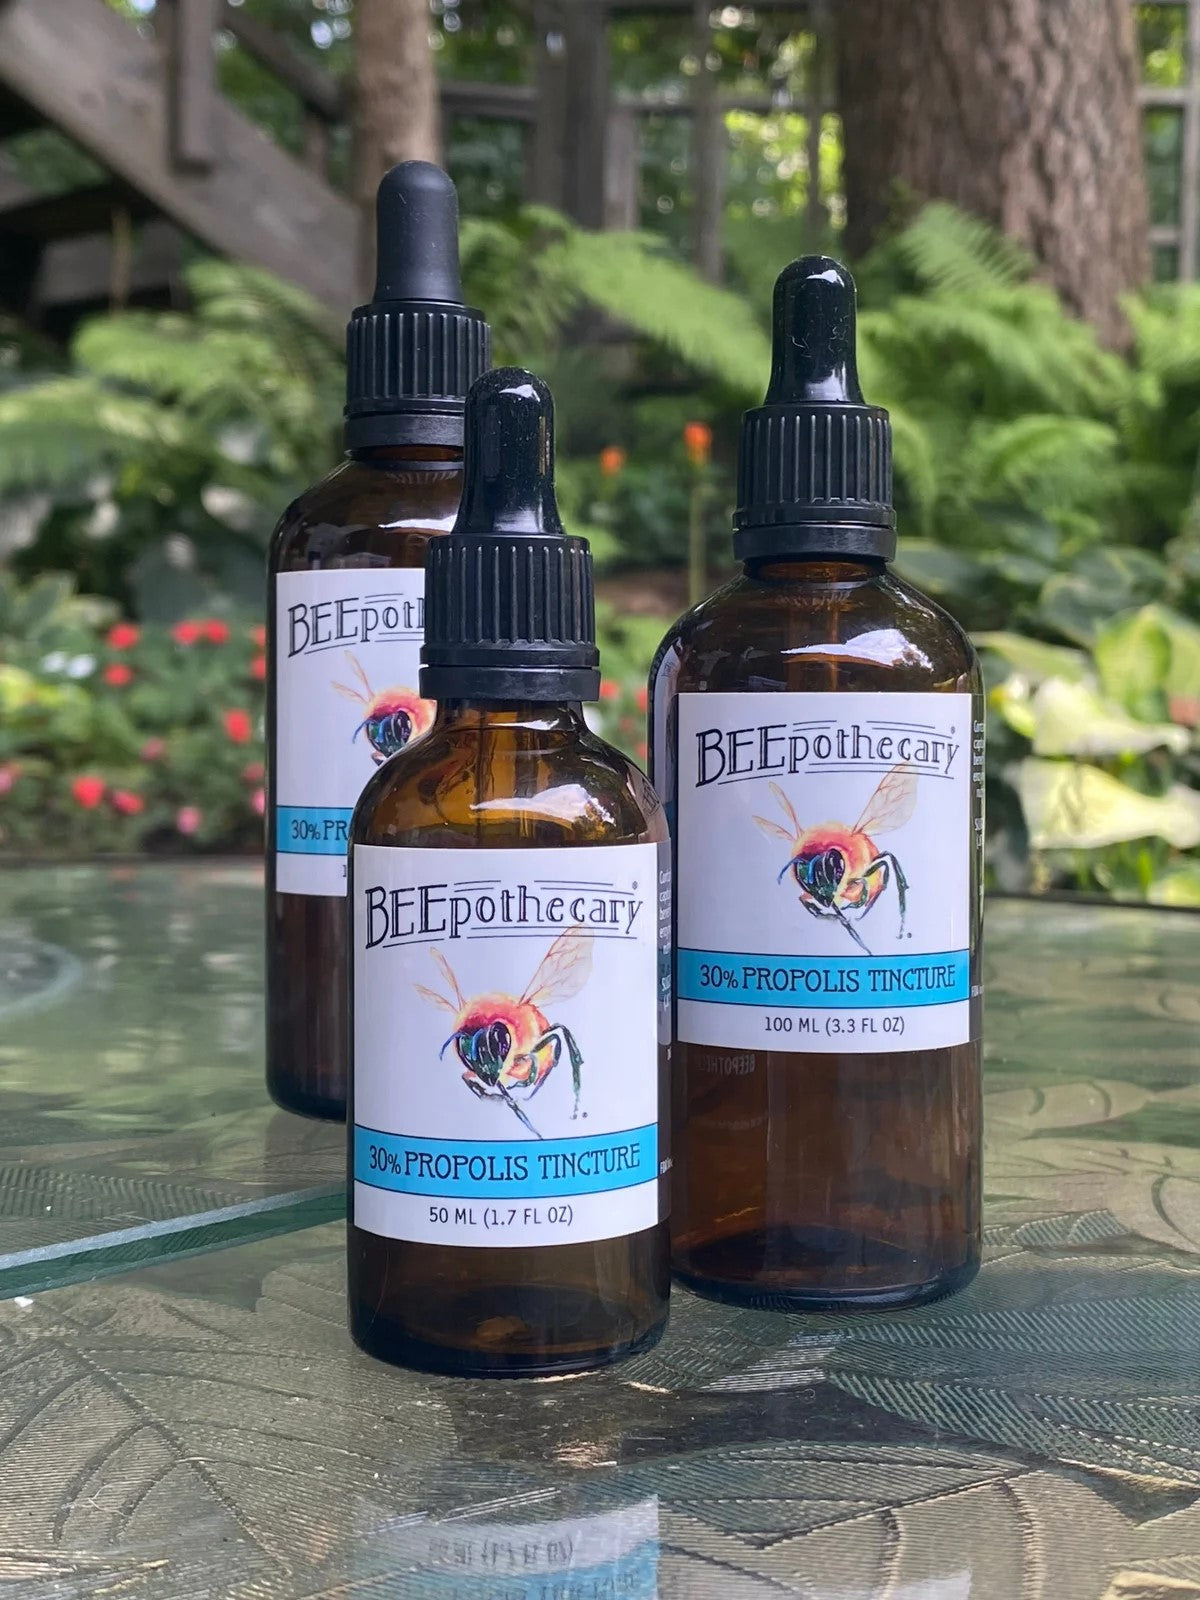 BEEpothecary 30% Propolis Tincture in brown dropper bottles with white label